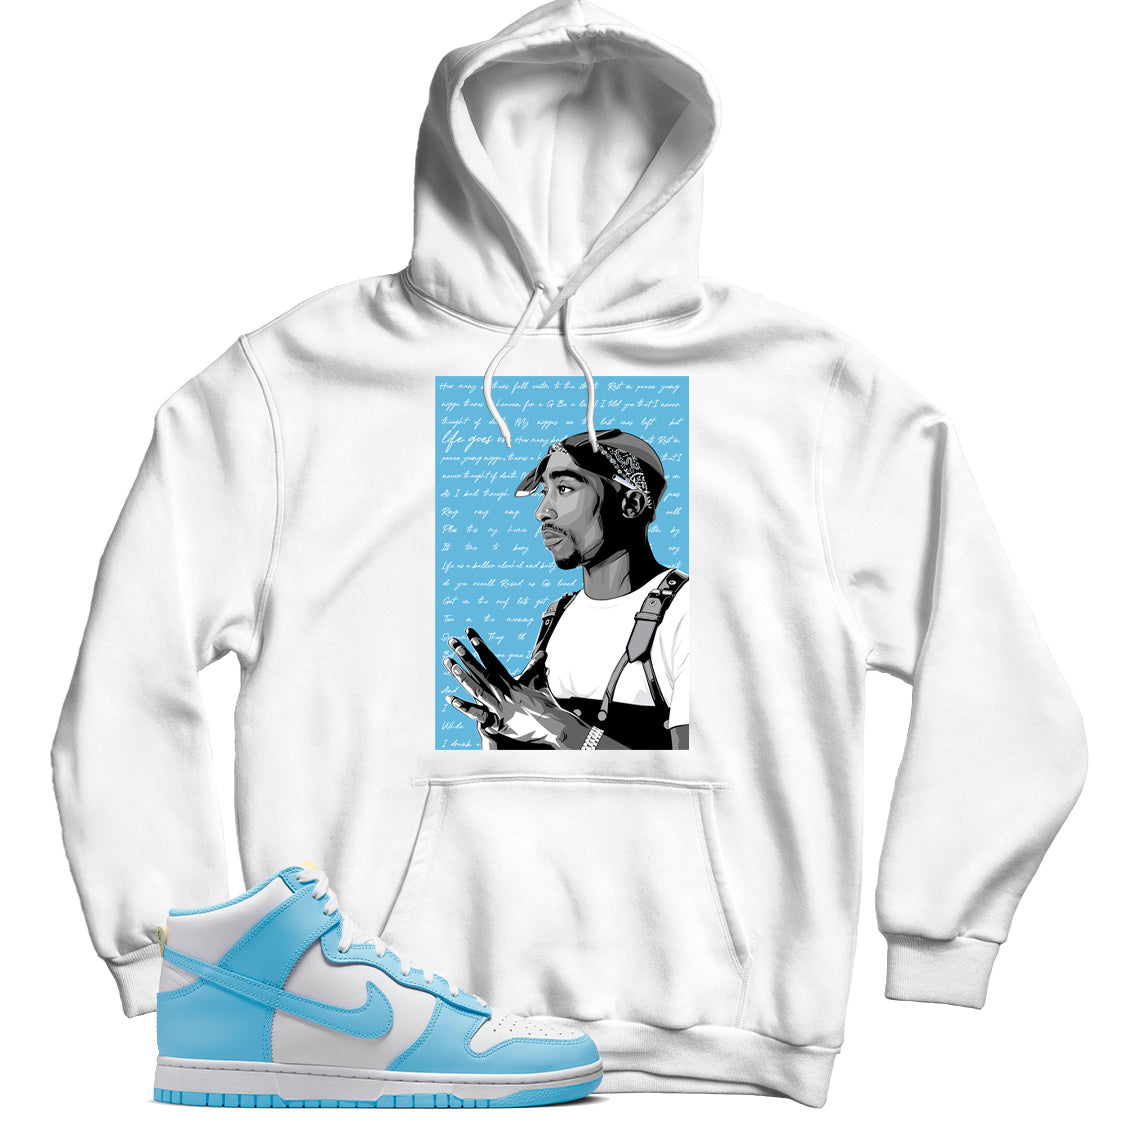 Blue Chill dunks hoodie